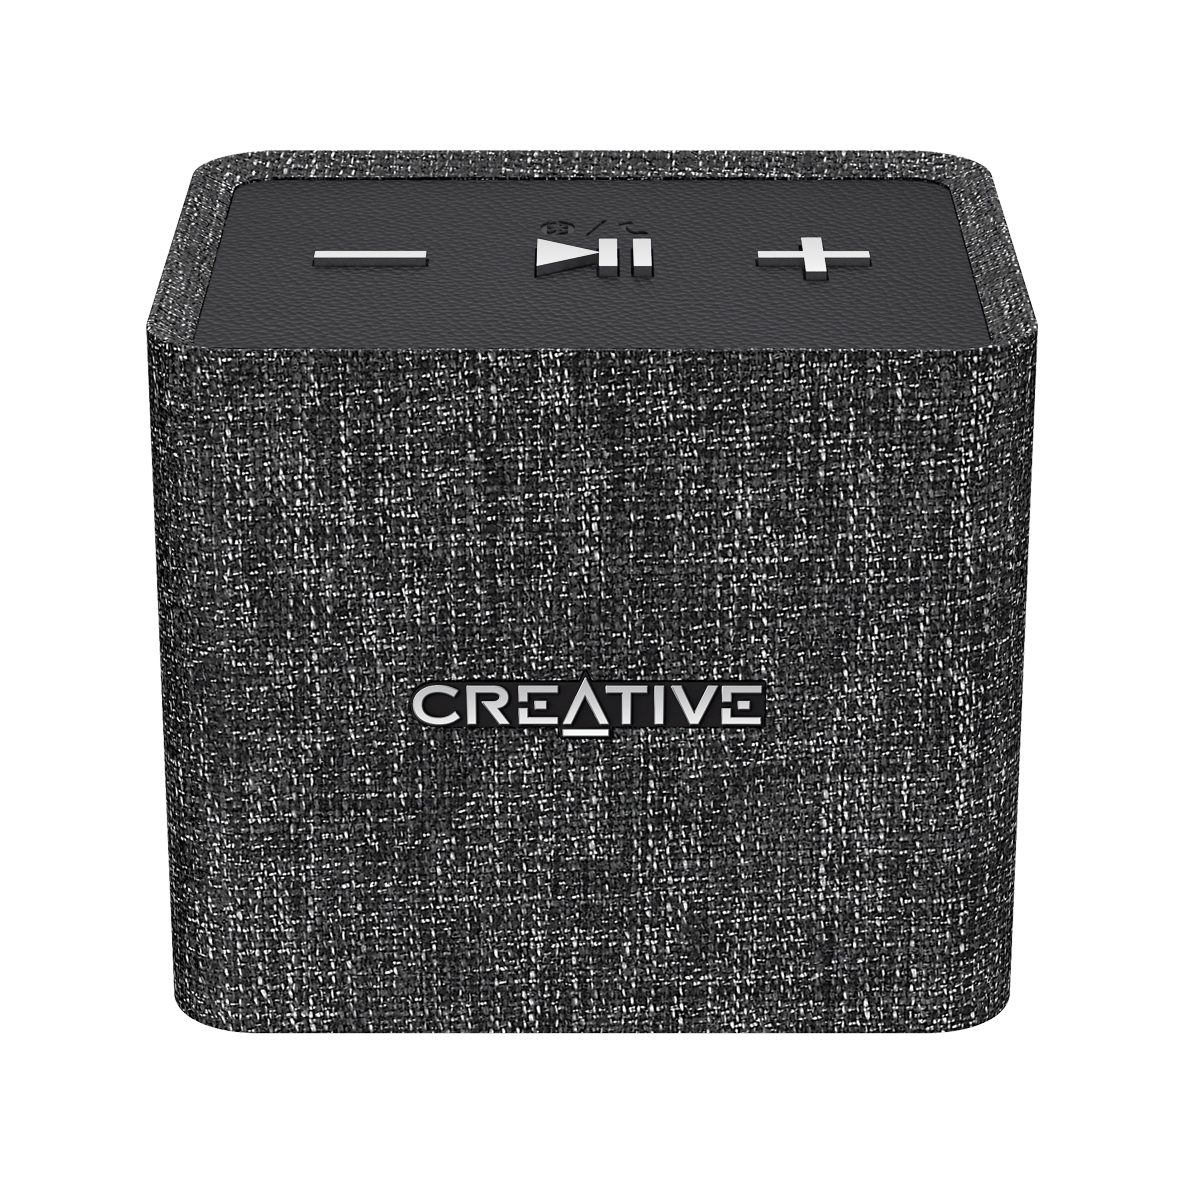 Creative Technology's audio devices make the best Diwali Gifts